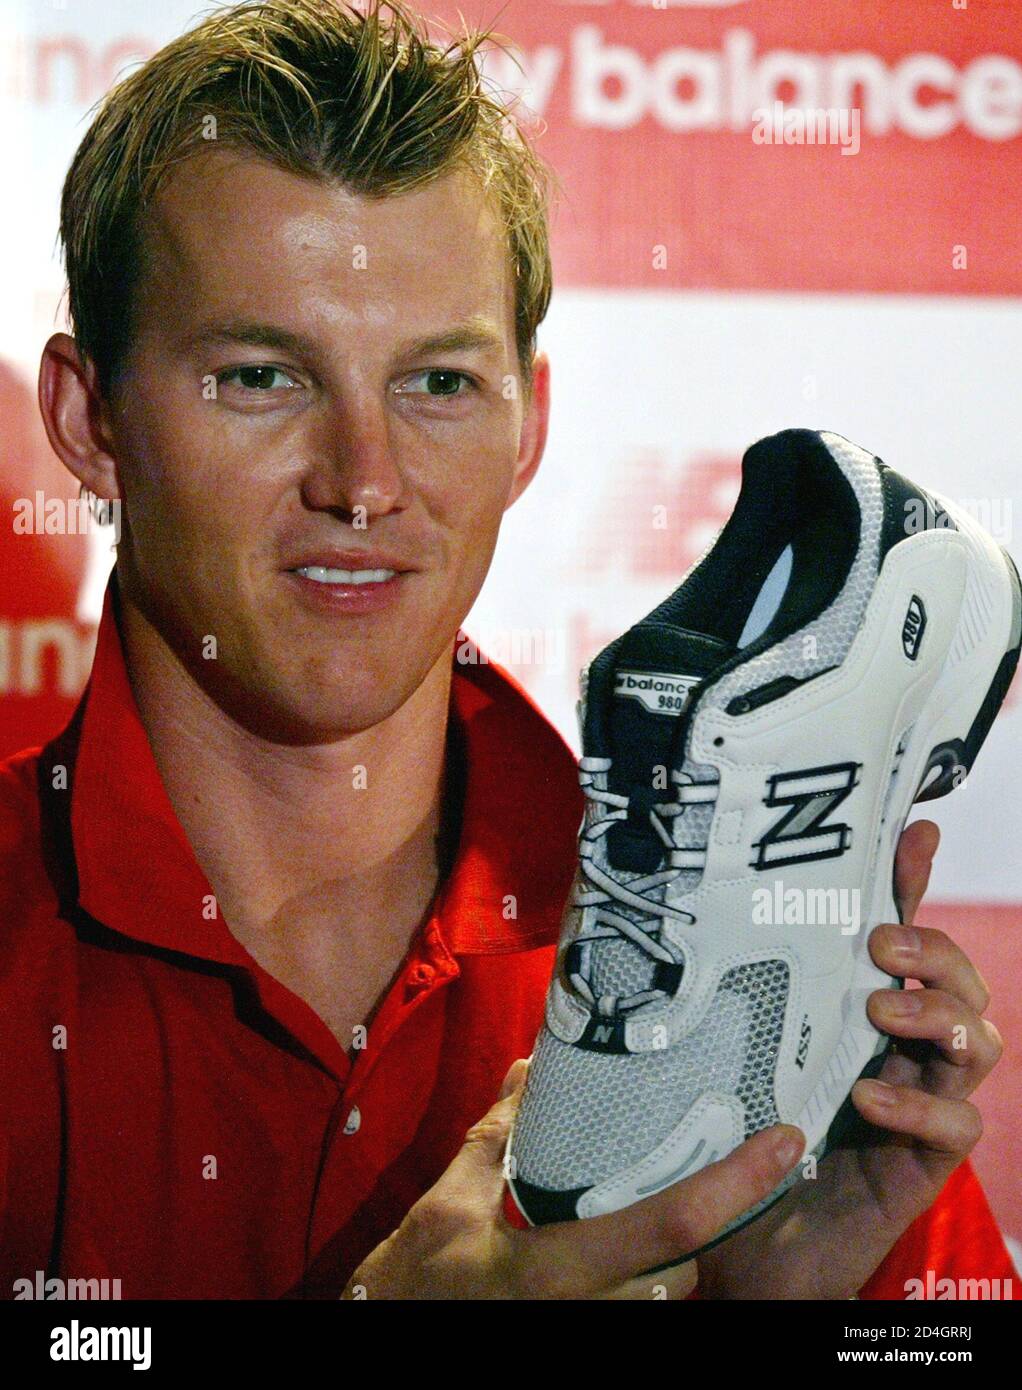 Australian fast bowler Brett Lee displays the new sports shoe by New Balance,  during its launch in Bombay May 2, 2005. Lee launched the new Spring Summer  'New Balance' sports wear collection